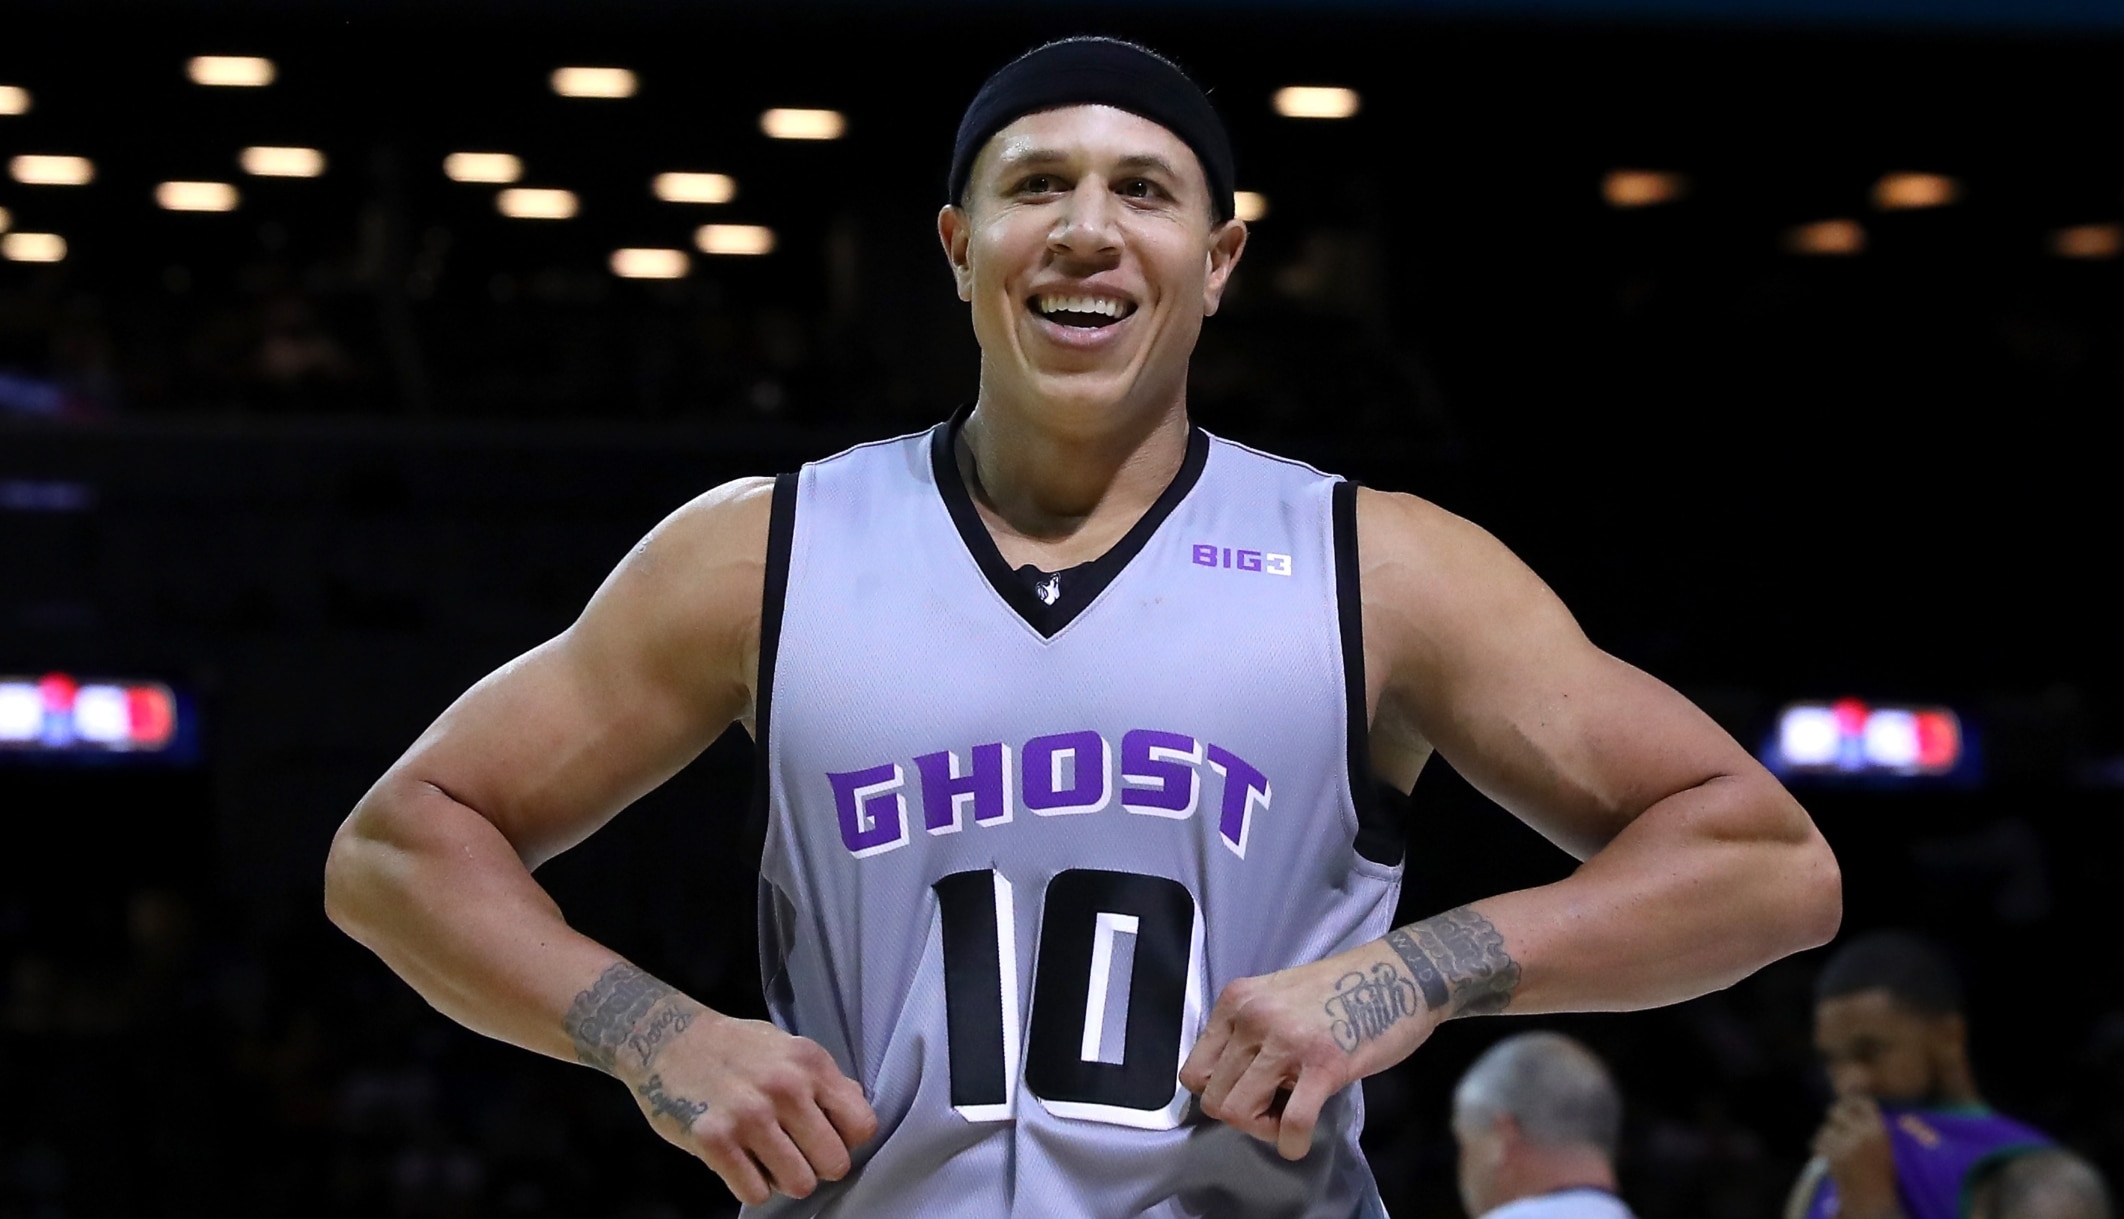 Ex-NBA star Mike Bibby suspended from his high school coaching gig after  restraining order